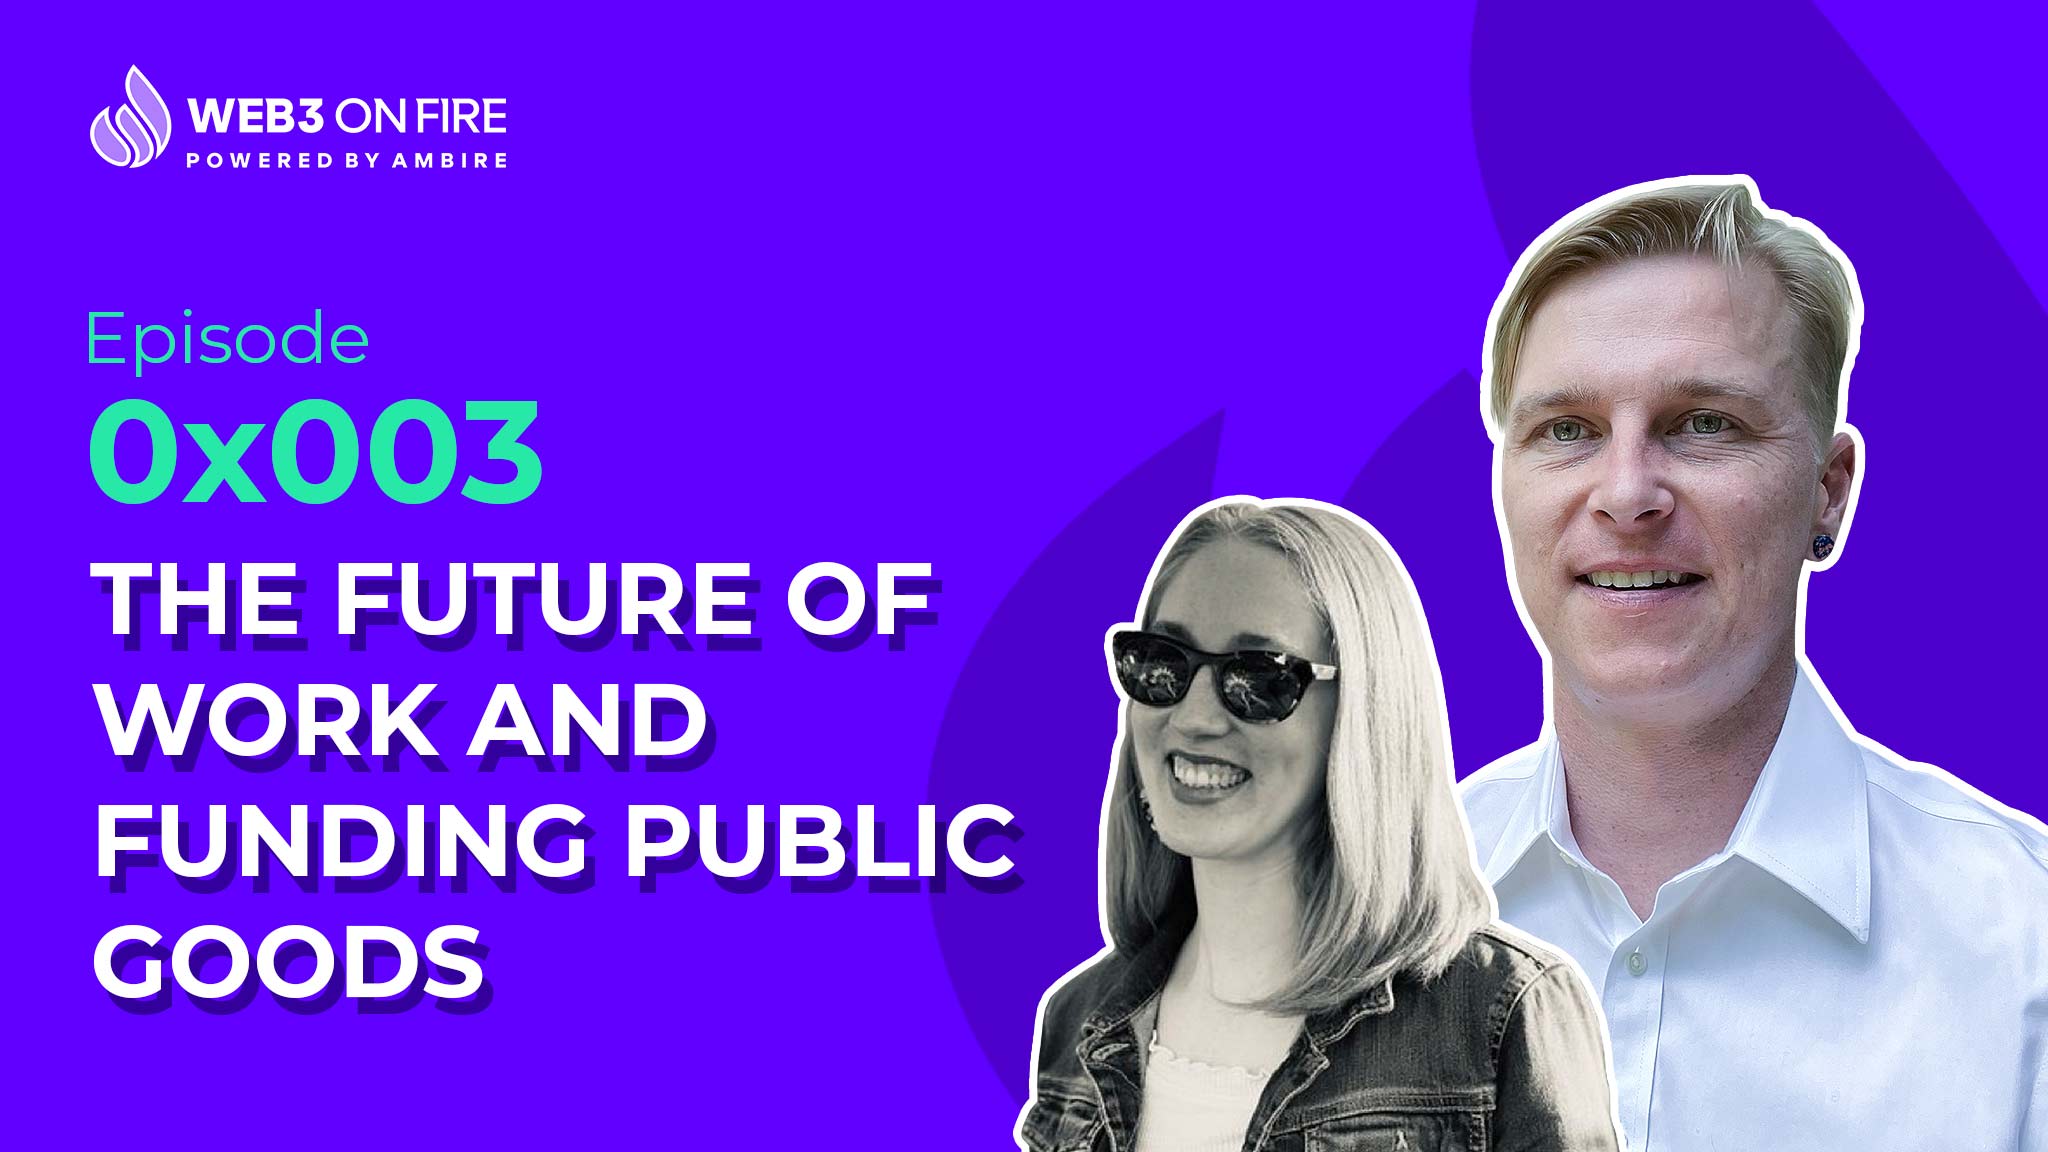 Web3 on Fire: The Future of Work and Funding Public Goods